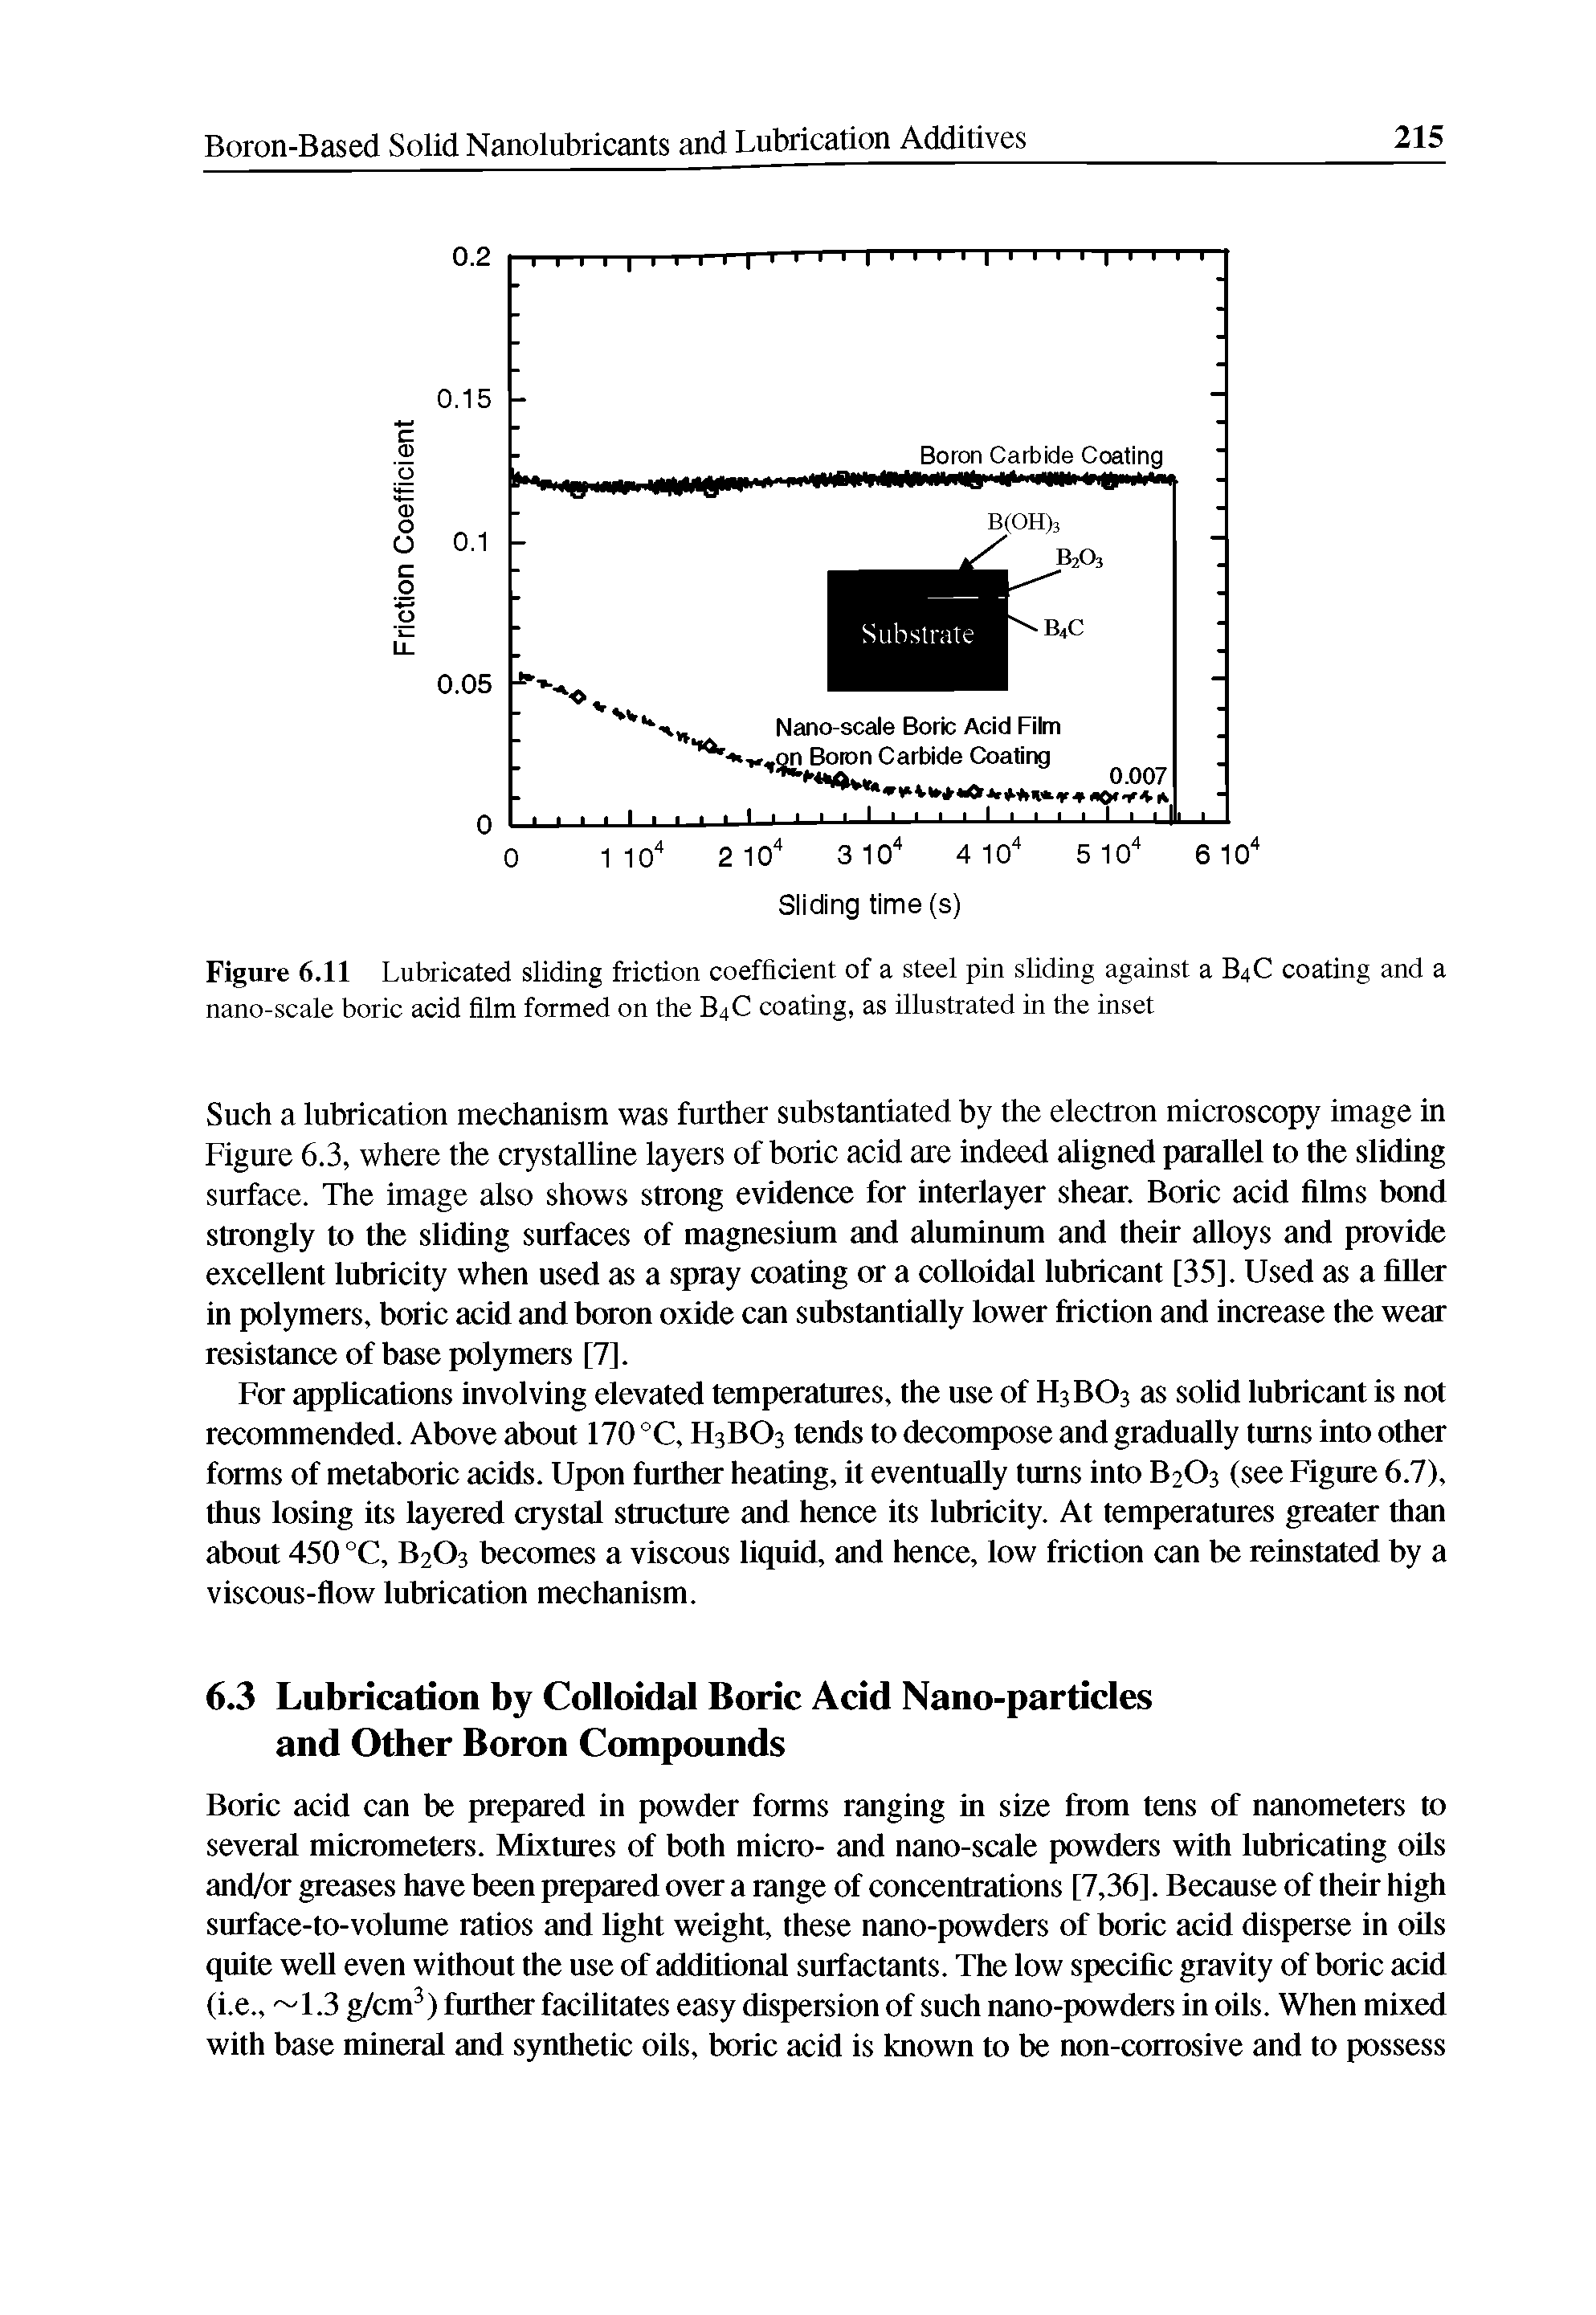 Figure 6.11 Lubricated sliding friction coefficient of a steel pin sliding against a B4C coating and a nano-scale boric acid film formed on the B4C coating, as illustrated in the inset...